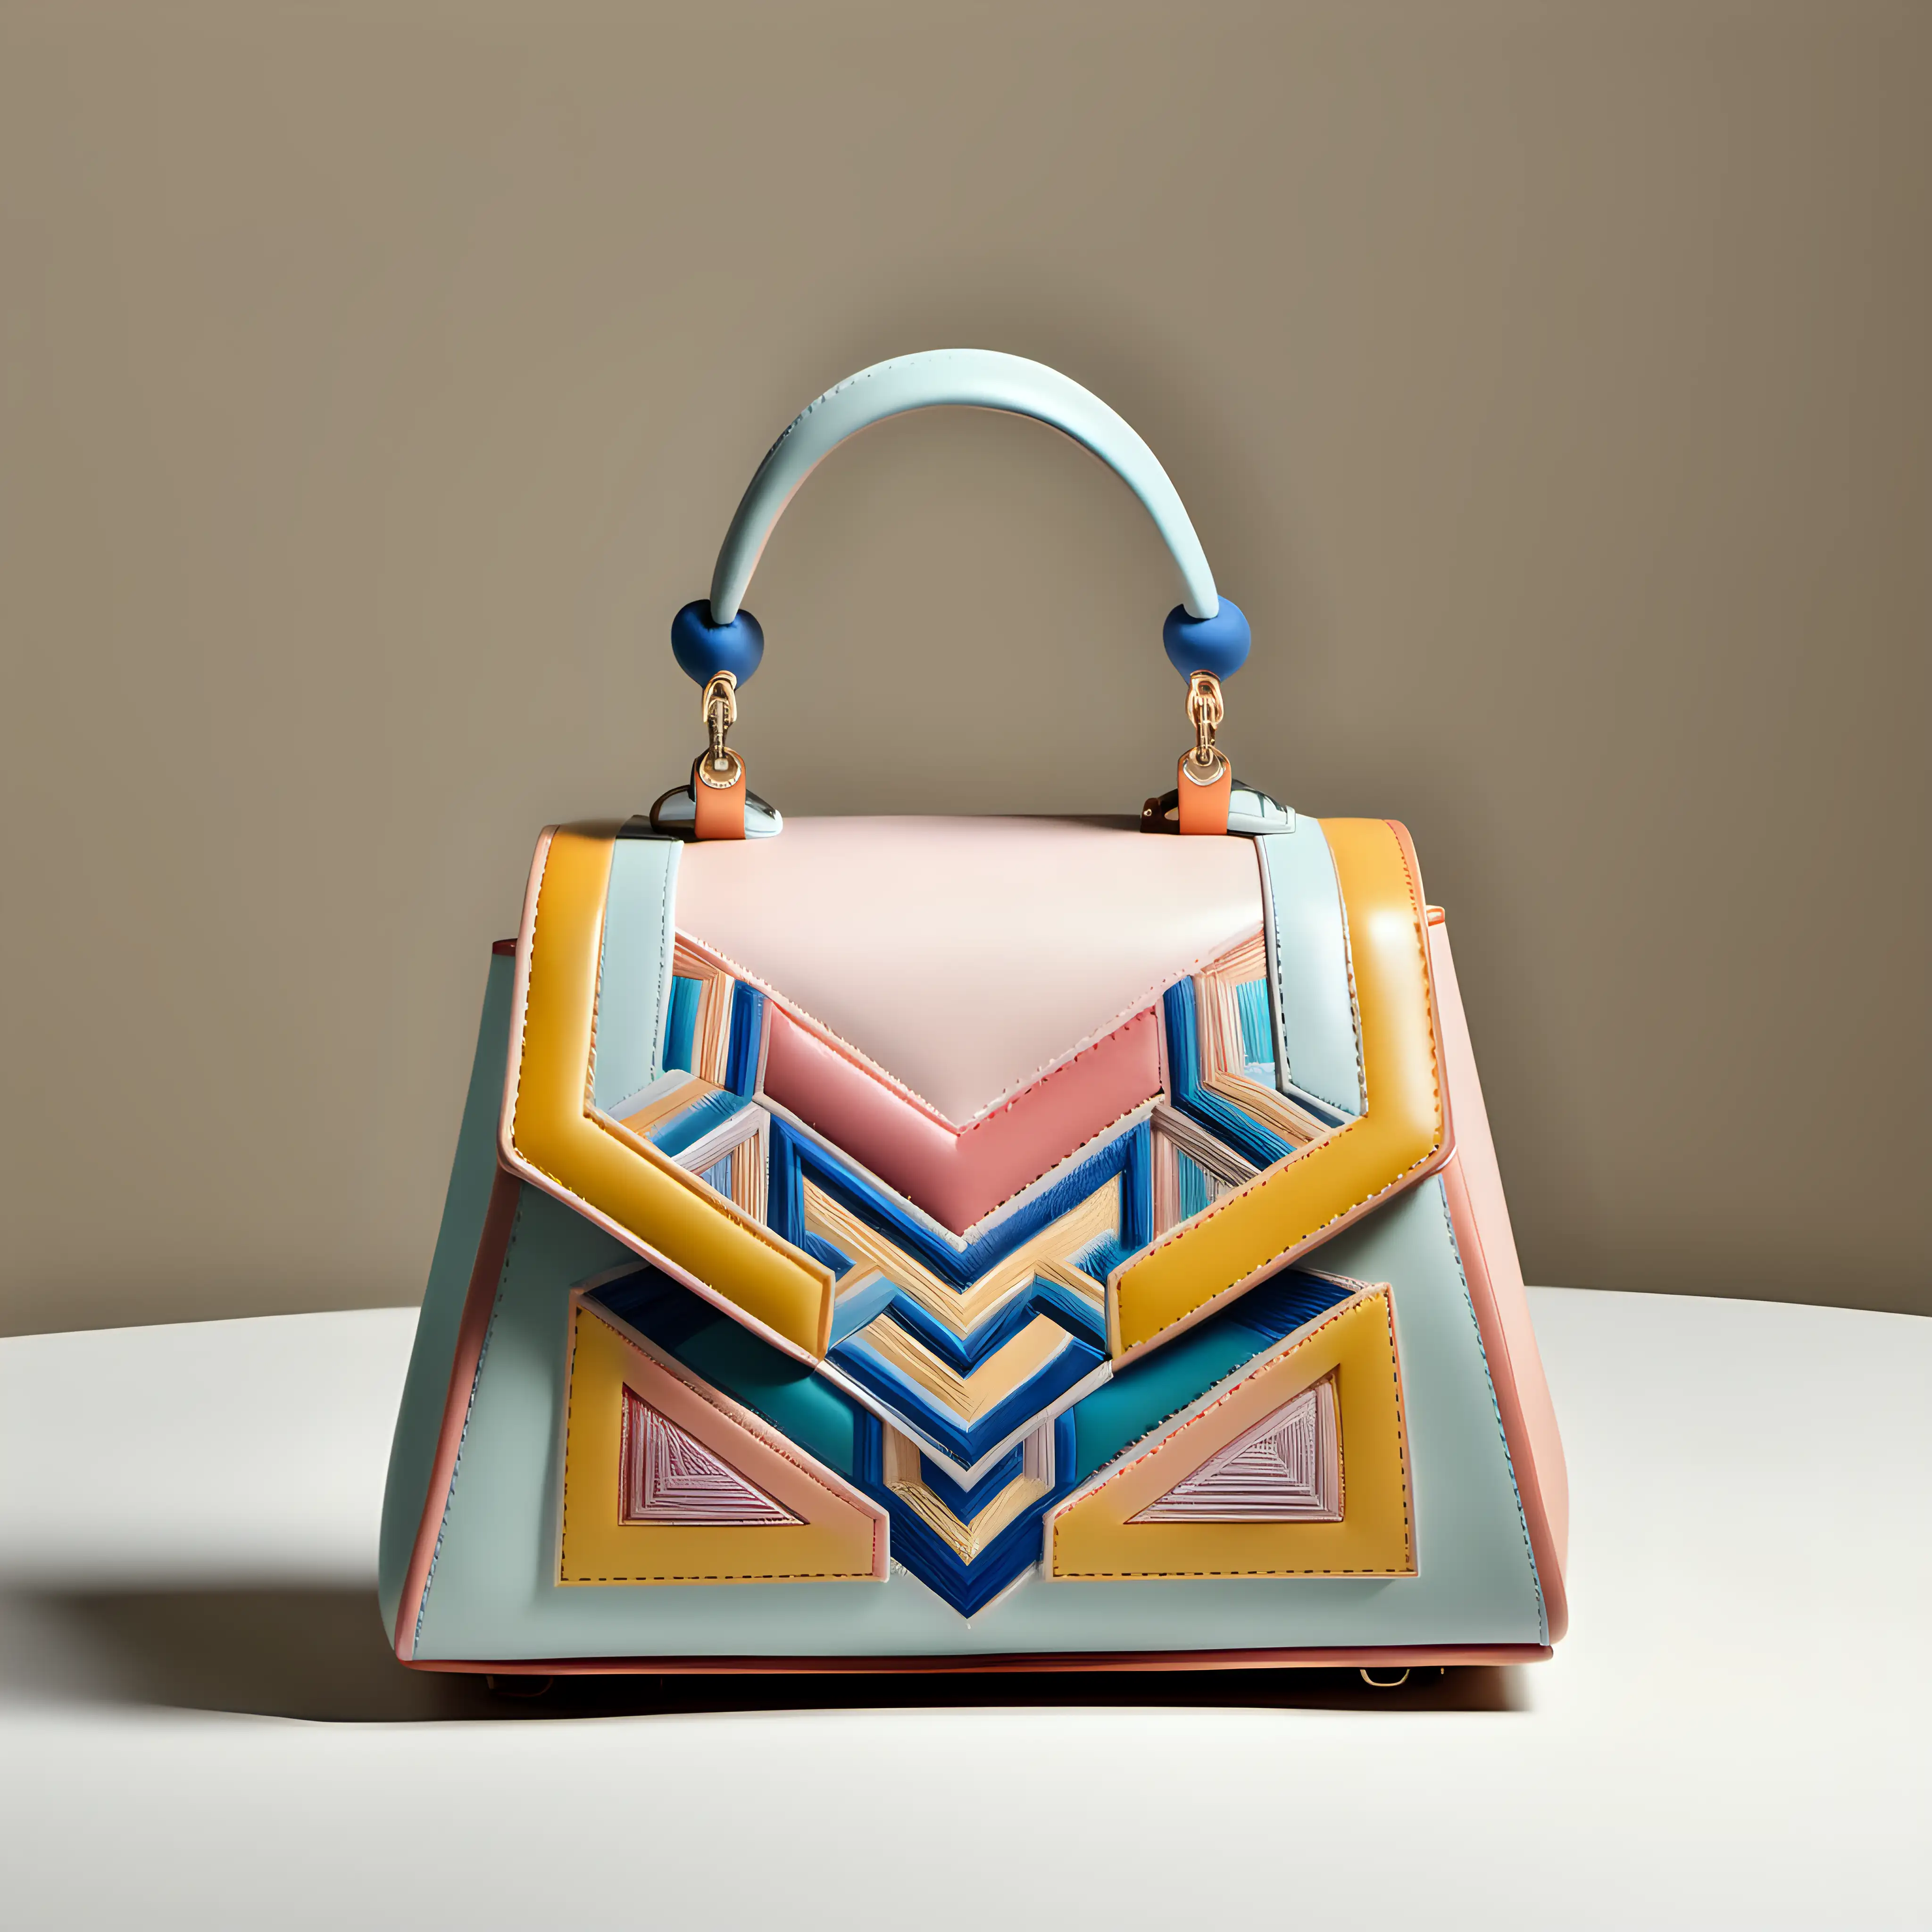 Mini luxury leather bag - frontal view - embroidered inserts color contrast with geometric design- pastel colors 